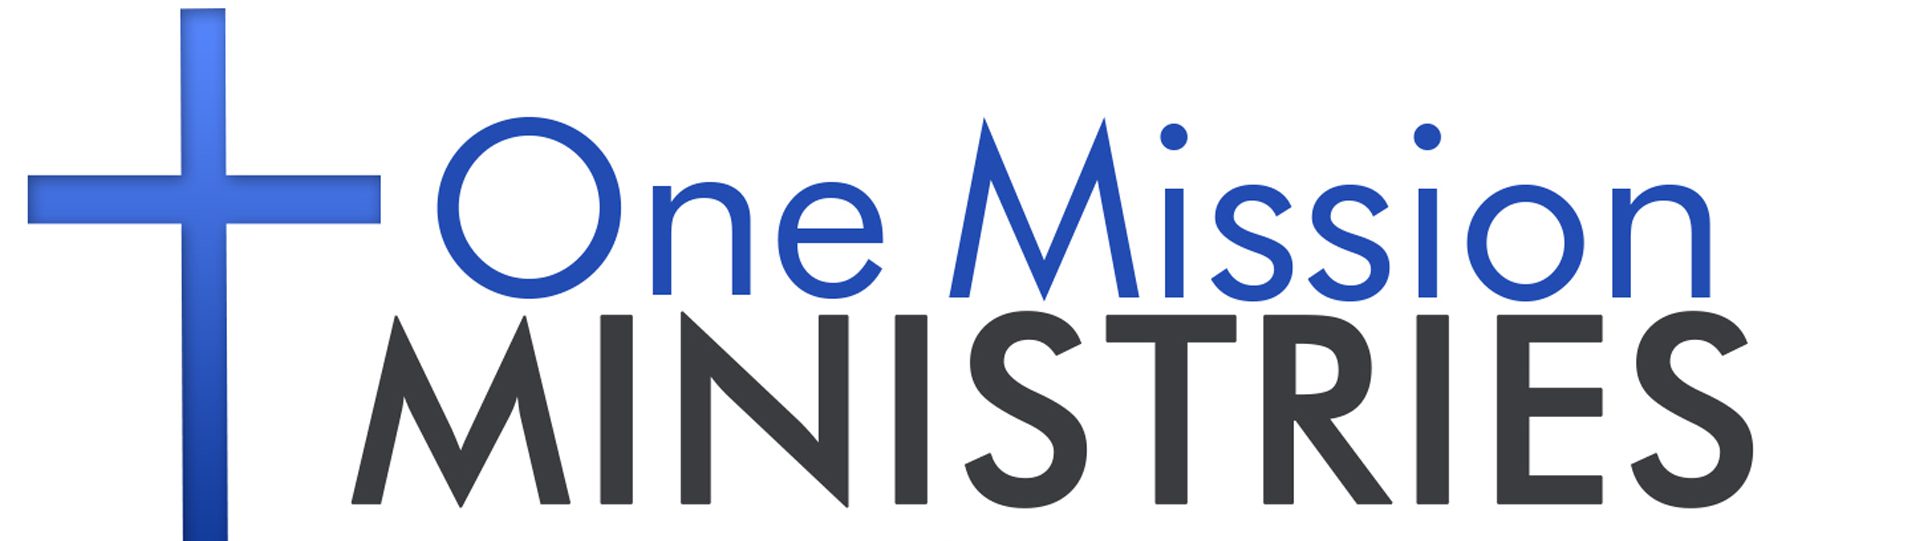 One Mission Ministries Blog